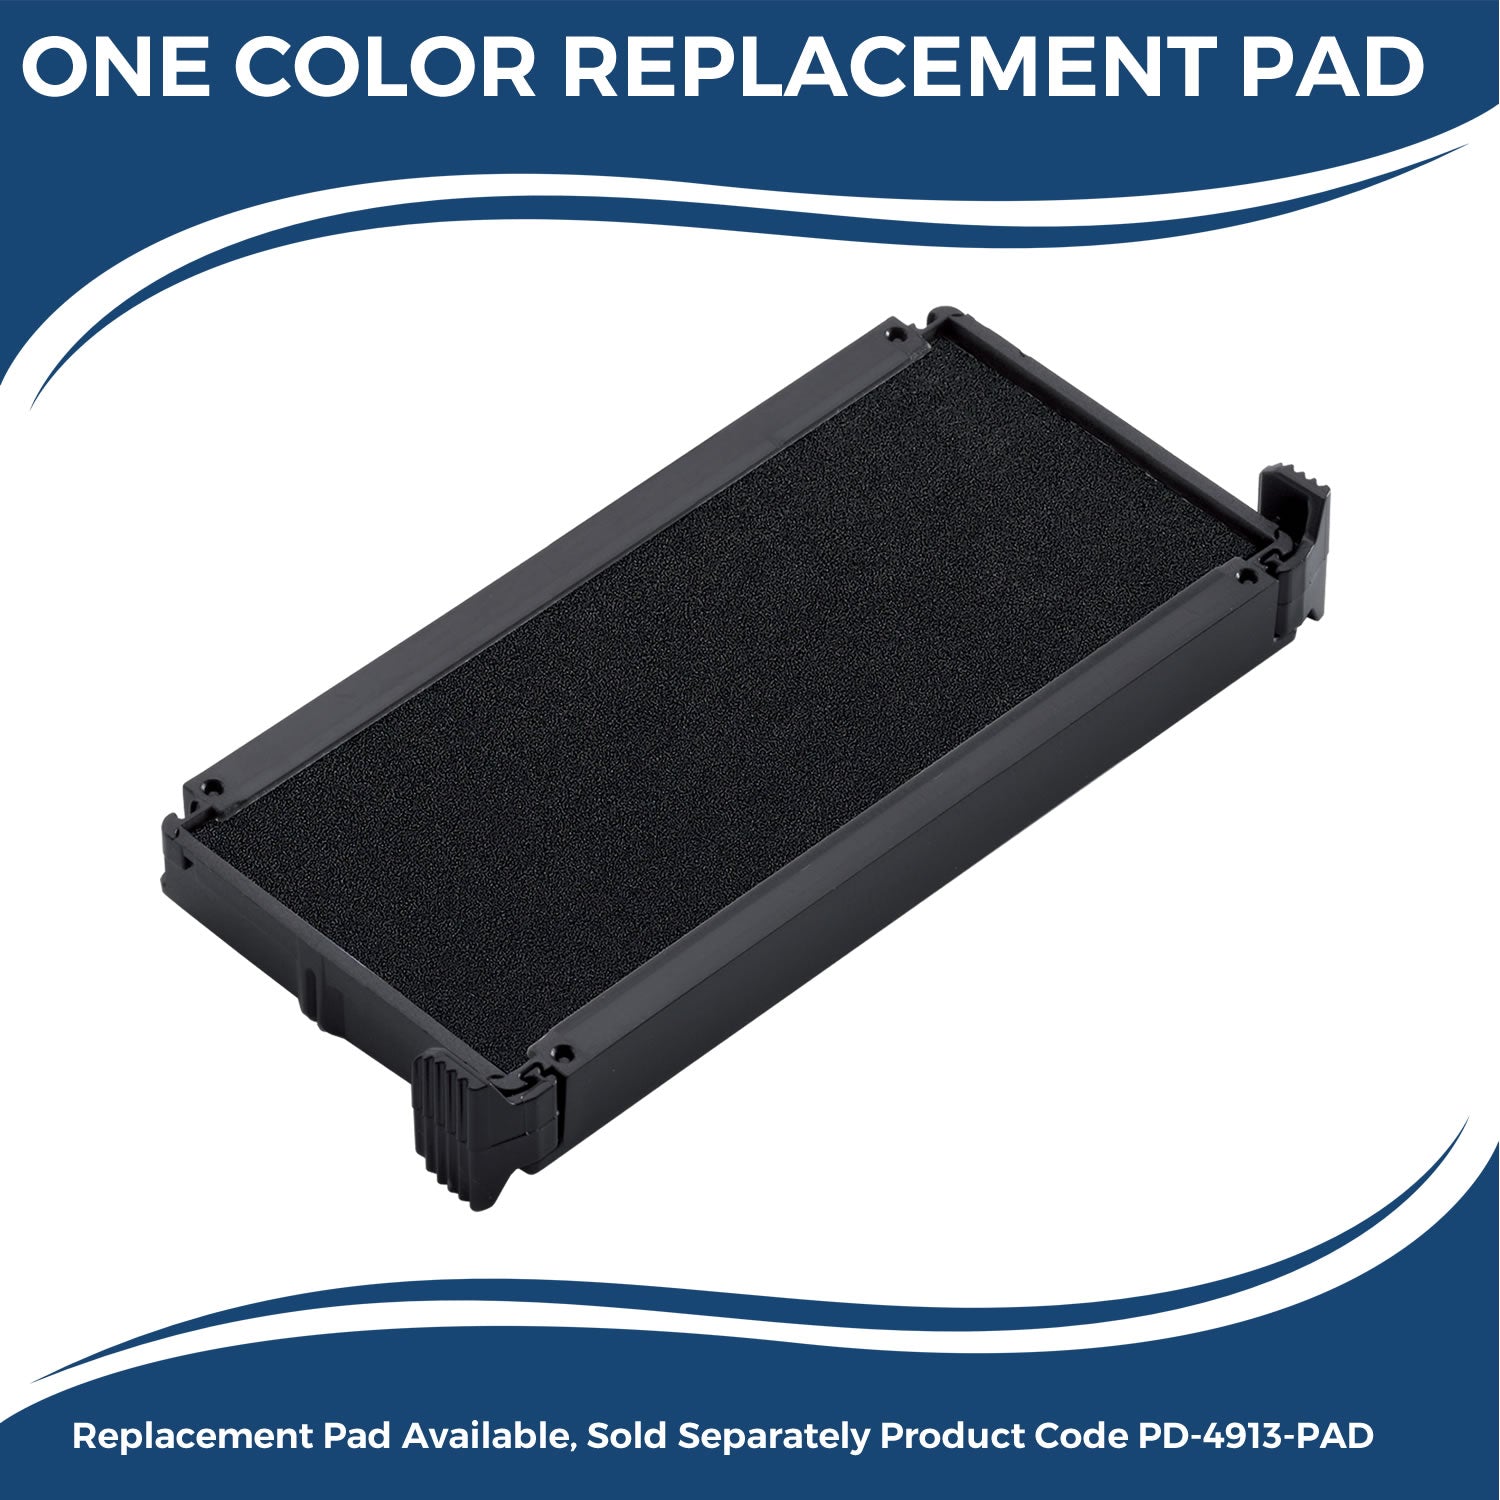 Large Self-Inking Spoiled Stamp 5594S Large Replacment Pad